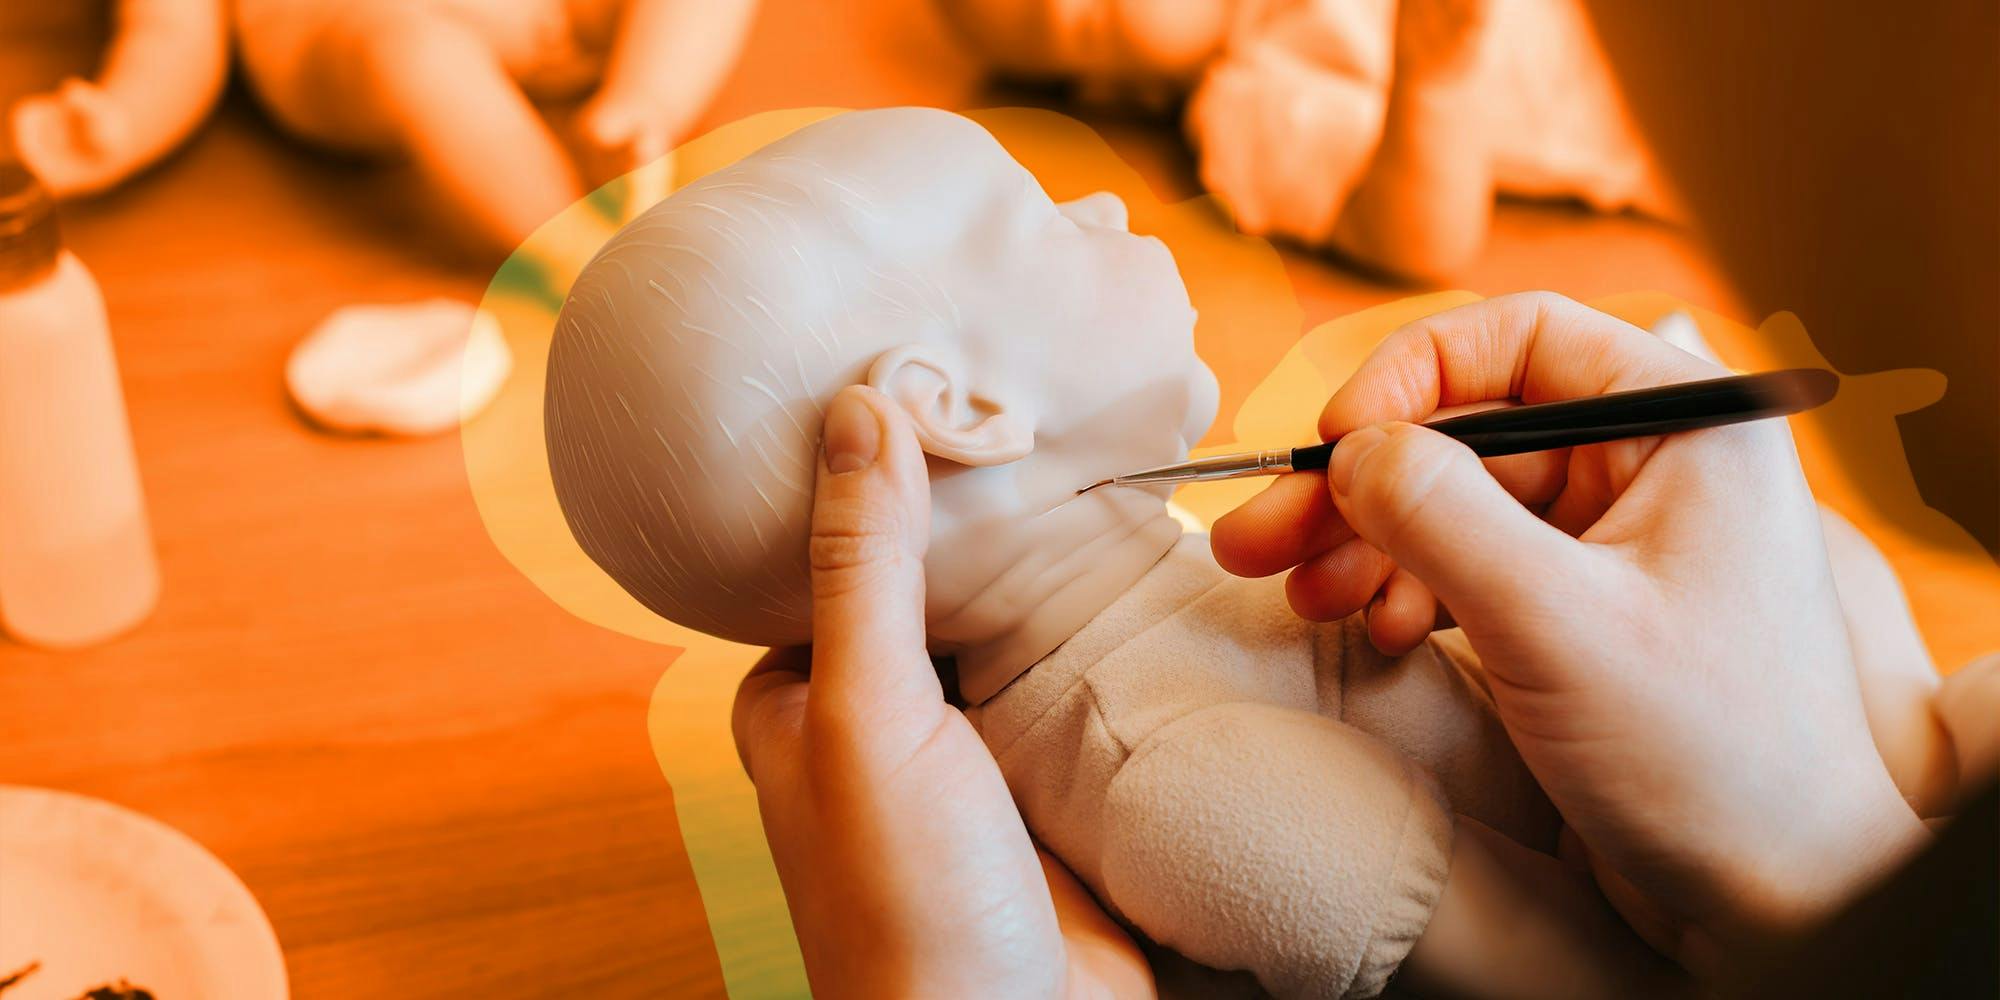 How a national baby formula shortage rocked TikTok’s community of ‘Reborn’ doll collectors